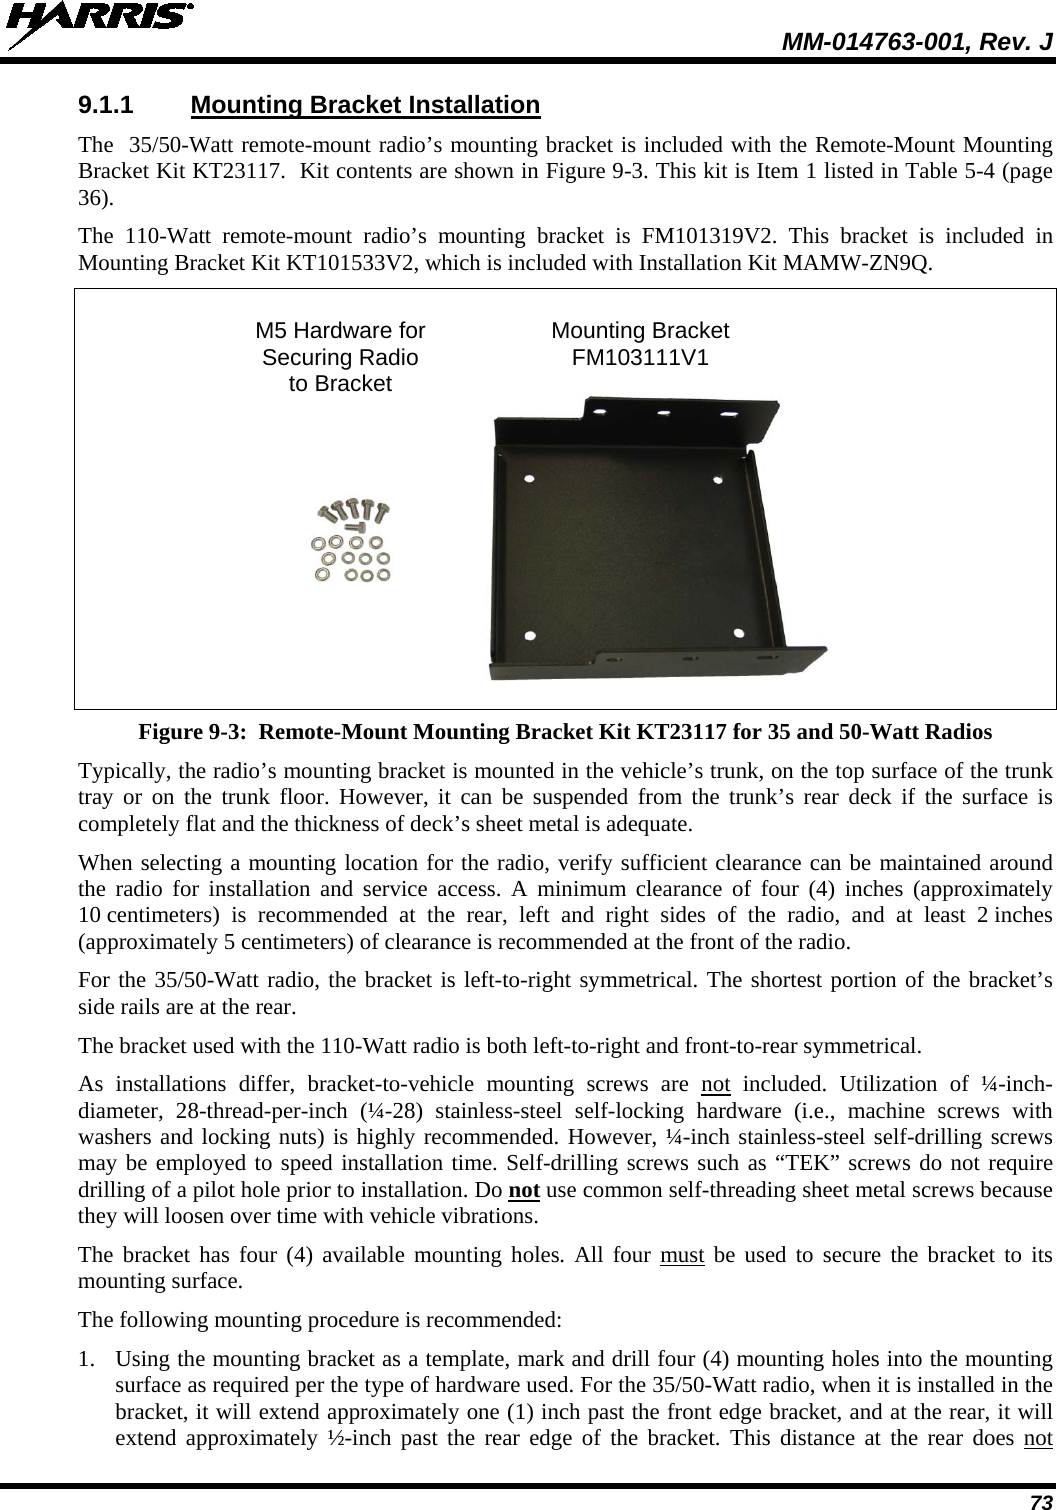  MM-014763-001, Rev. J 73 9.1.1 Mounting Bracket Installation The  35/50-Watt remote-mount radio’s mounting bracket is included with the Remote-Mount Mounting Bracket Kit KT23117.  Kit contents are shown in Figure 9-3. This kit is Item 1 listed in Table 5-4 (page 36). The 110-Watt remote-mount radio’s mounting bracket is FM101319V2. This bracket is included in Mounting Bracket Kit KT101533V2, which is included with Installation Kit MAMW-ZN9Q.   M5 Hardware for Mounting Bracket  Securing Radio FM103111V1  to Bracket   Figure 9-3:  Remote-Mount Mounting Bracket Kit KT23117 for 35 and 50-Watt Radios Typically, the radio’s mounting bracket is mounted in the vehicle’s trunk, on the top surface of the trunk tray or on  the trunk floor. However, it can be suspended from the trunk’s rear deck if the surface is completely flat and the thickness of deck’s sheet metal is adequate. When selecting a mounting location for the radio, verify sufficient clearance can be maintained around the radio for installation and service access. A minimum clearance  of  four (4)  inches (approximately 10 centimeters)  is recommended at the rear,  left and right sides of the radio, and at least 2 inches (approximately 5 centimeters) of clearance is recommended at the front of the radio. For the 35/50-Watt radio, the bracket is left-to-right symmetrical. The shortest portion of the bracket’s side rails are at the rear. The bracket used with the 110-Watt radio is both left-to-right and front-to-rear symmetrical. As installations differ, bracket-to-vehicle mounting screws are not included. Utilization of ¼-inch-diameter, 28-thread-per-inch (¼-28) stainless-steel self-locking hardware (i.e., machine screws with washers and locking nuts) is highly recommended. However, ¼-inch stainless-steel self-drilling screws may be employed to speed installation time. Self-drilling screws such as “TEK” screws do not require drilling of a pilot hole prior to installation. Do not use common self-threading sheet metal screws because they will loosen over time with vehicle vibrations. The bracket has four (4) available mounting holes. All four must be used to secure the bracket to its mounting surface. The following mounting procedure is recommended: 1. Using the mounting bracket as a template, mark and drill four (4) mounting holes into the mounting surface as required per the type of hardware used. For the 35/50-Watt radio, when it is installed in the bracket, it will extend approximately one (1) inch past the front edge bracket, and at the rear, it will extend approximately ½-inch past the rear edge of the bracket. This distance at the rear does not 